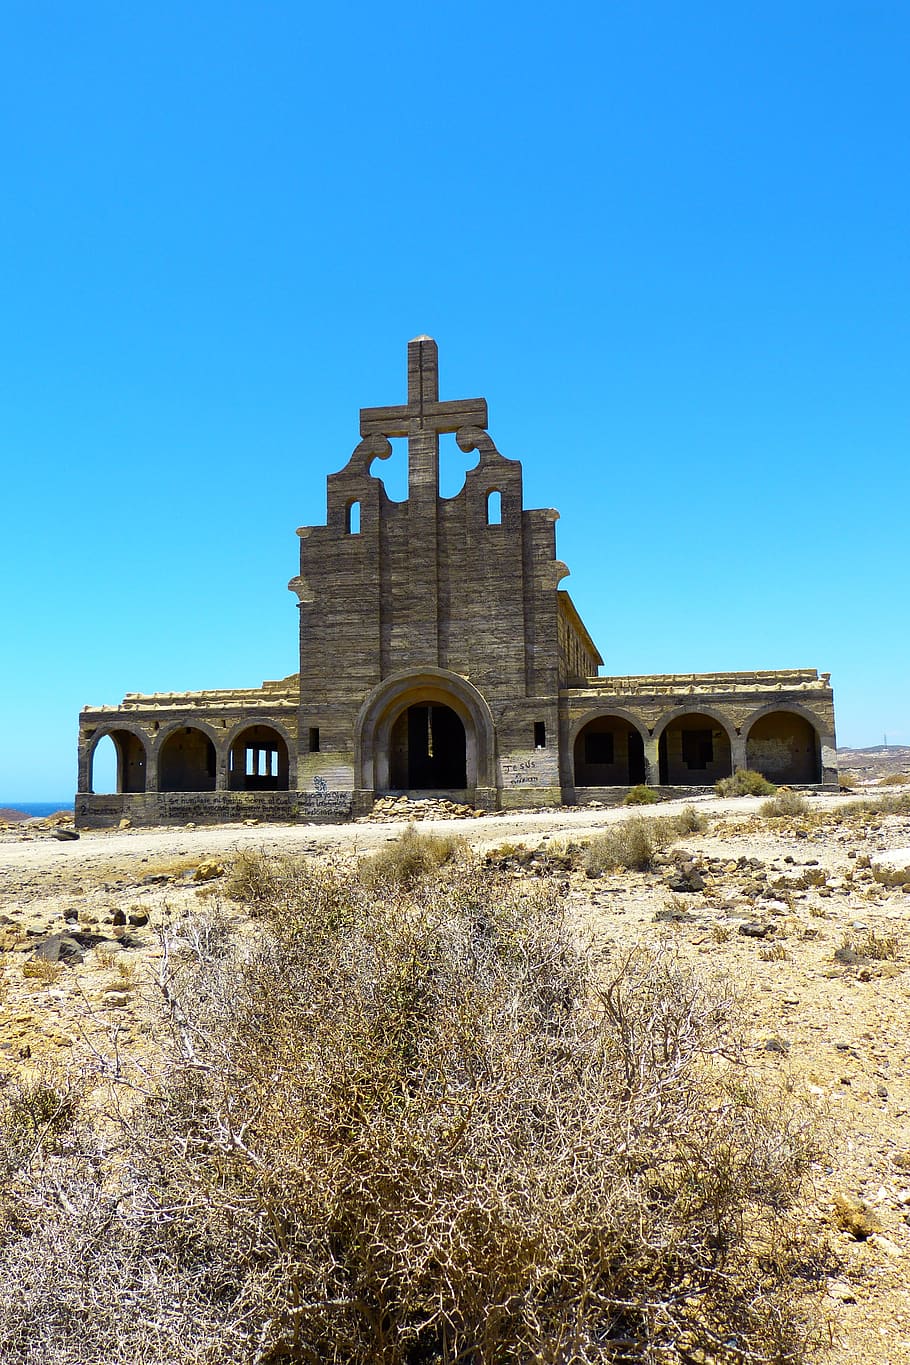 ghost town, abades, tenerife, leprosy, church, lost place, abandoned, past, lapsed, weird